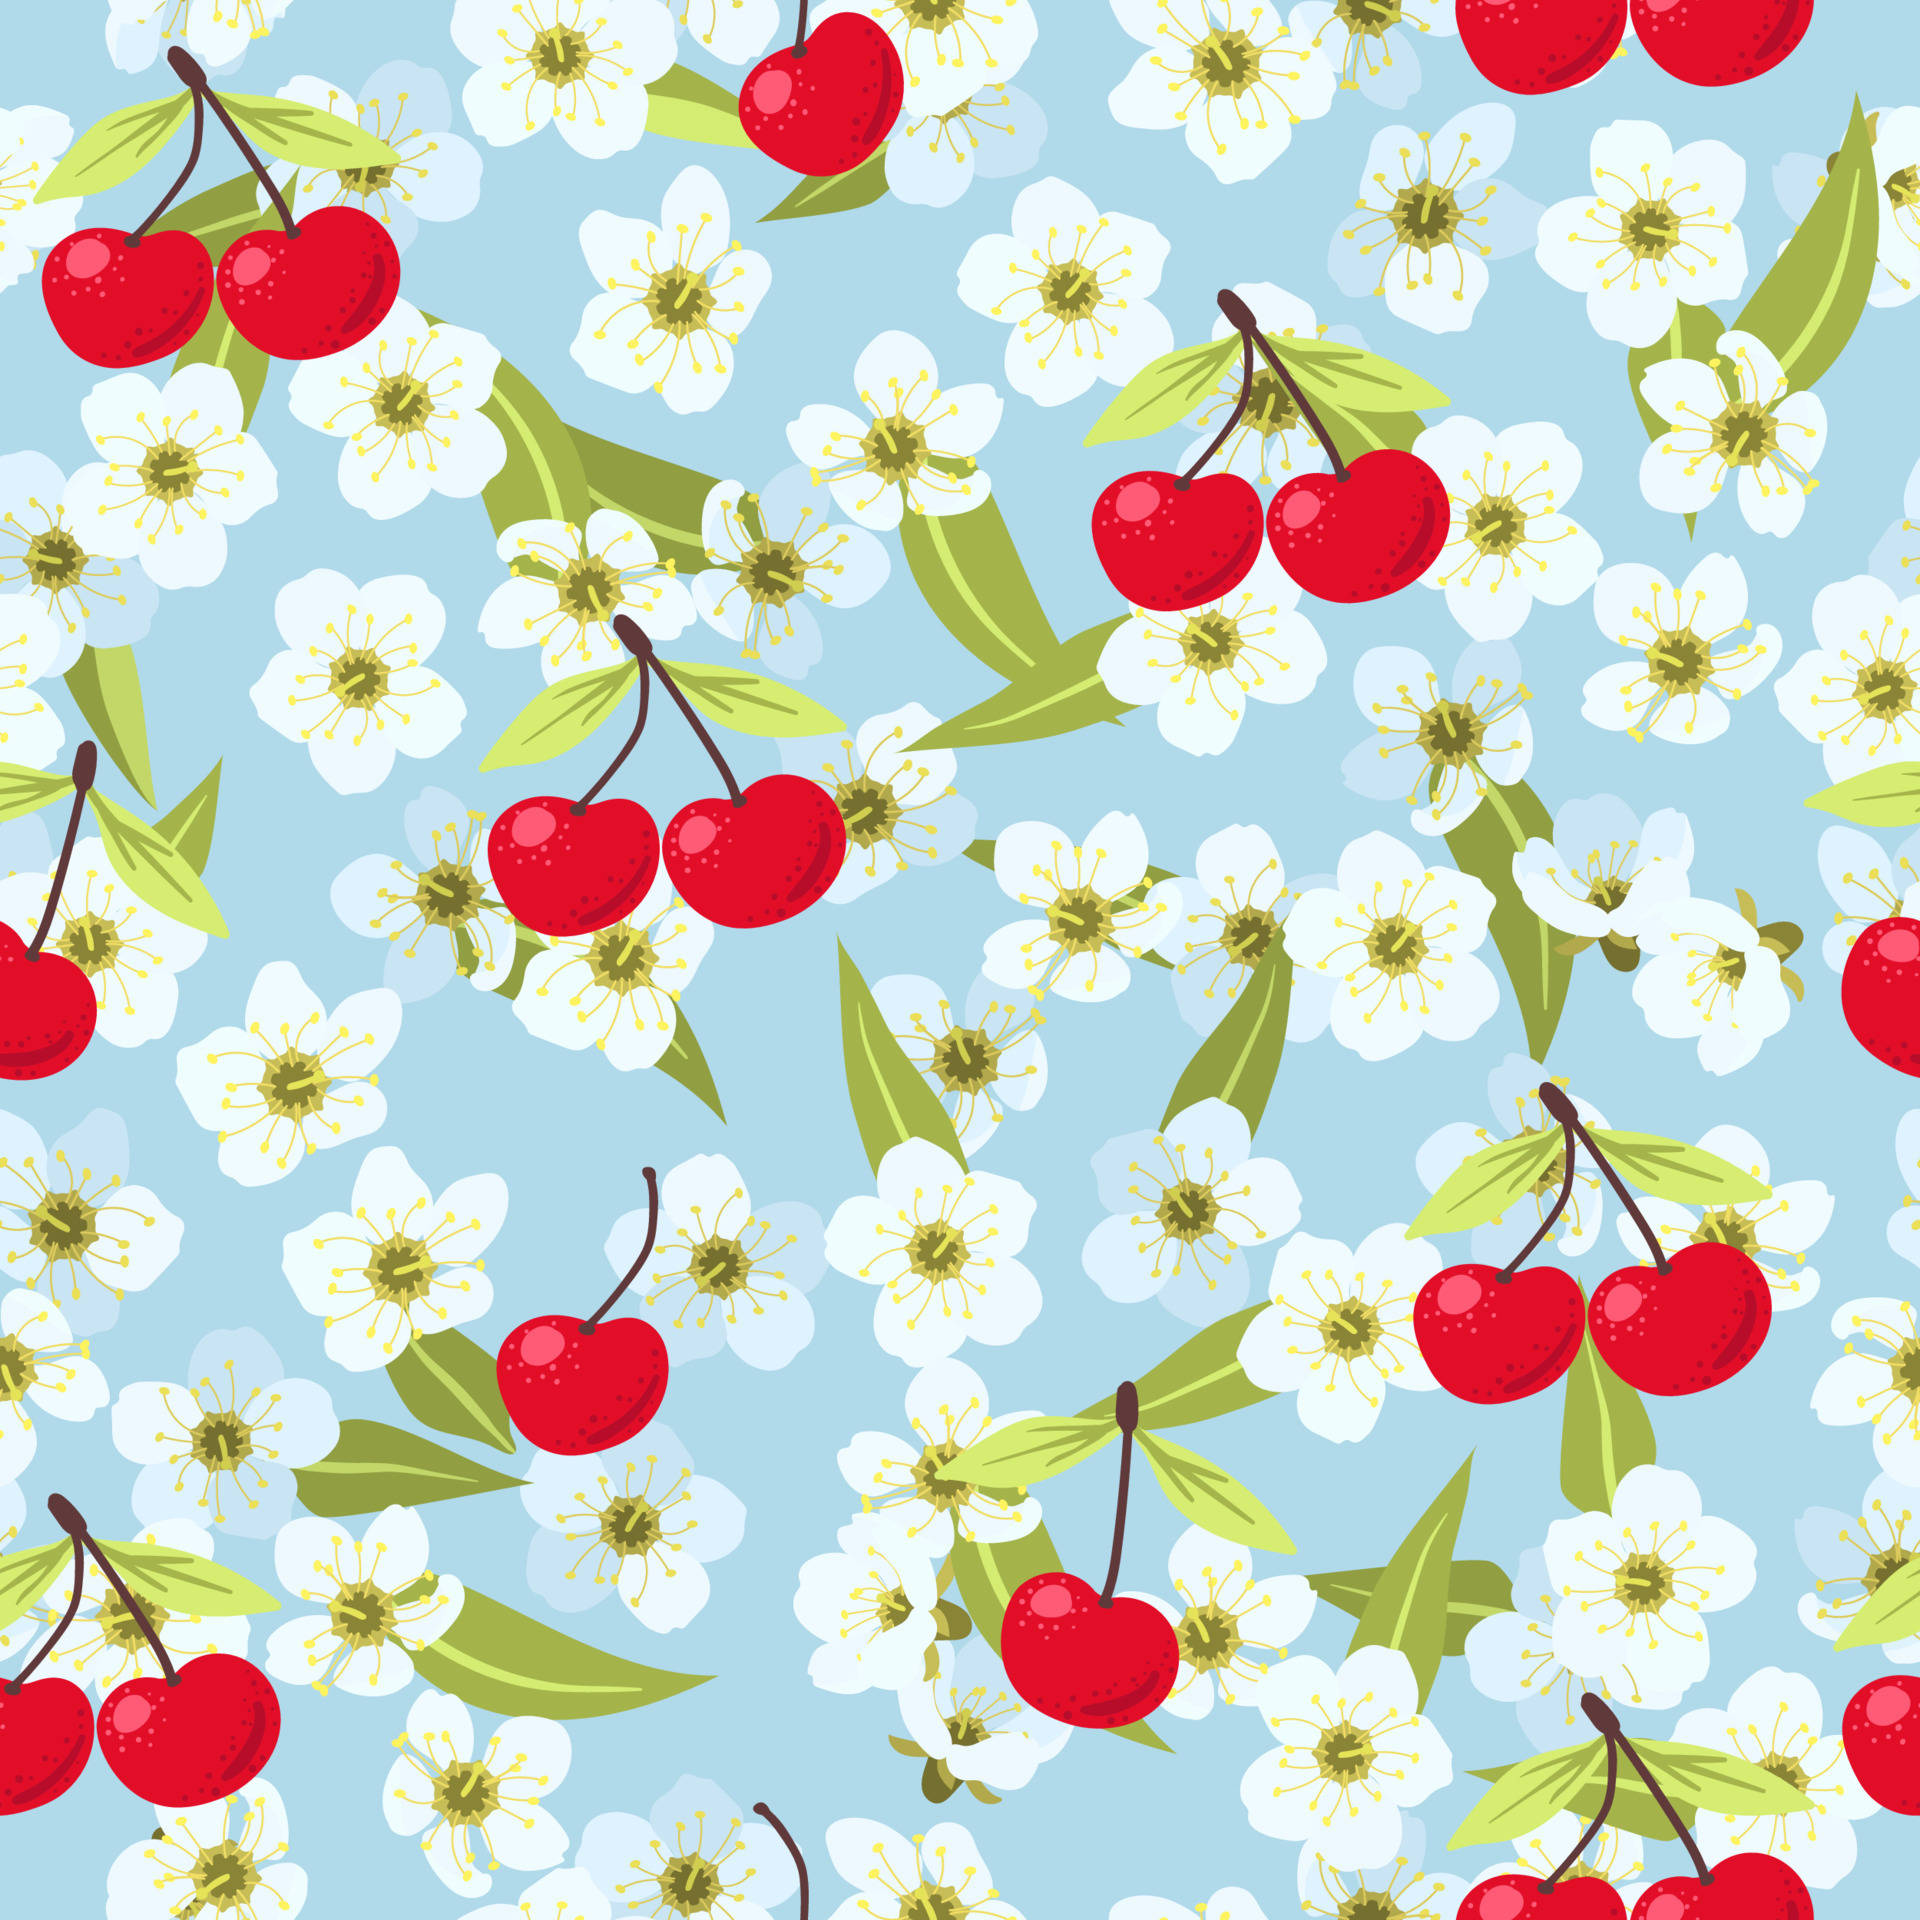 A Seamless Pattern With Cherries And Flowers Wallpaper